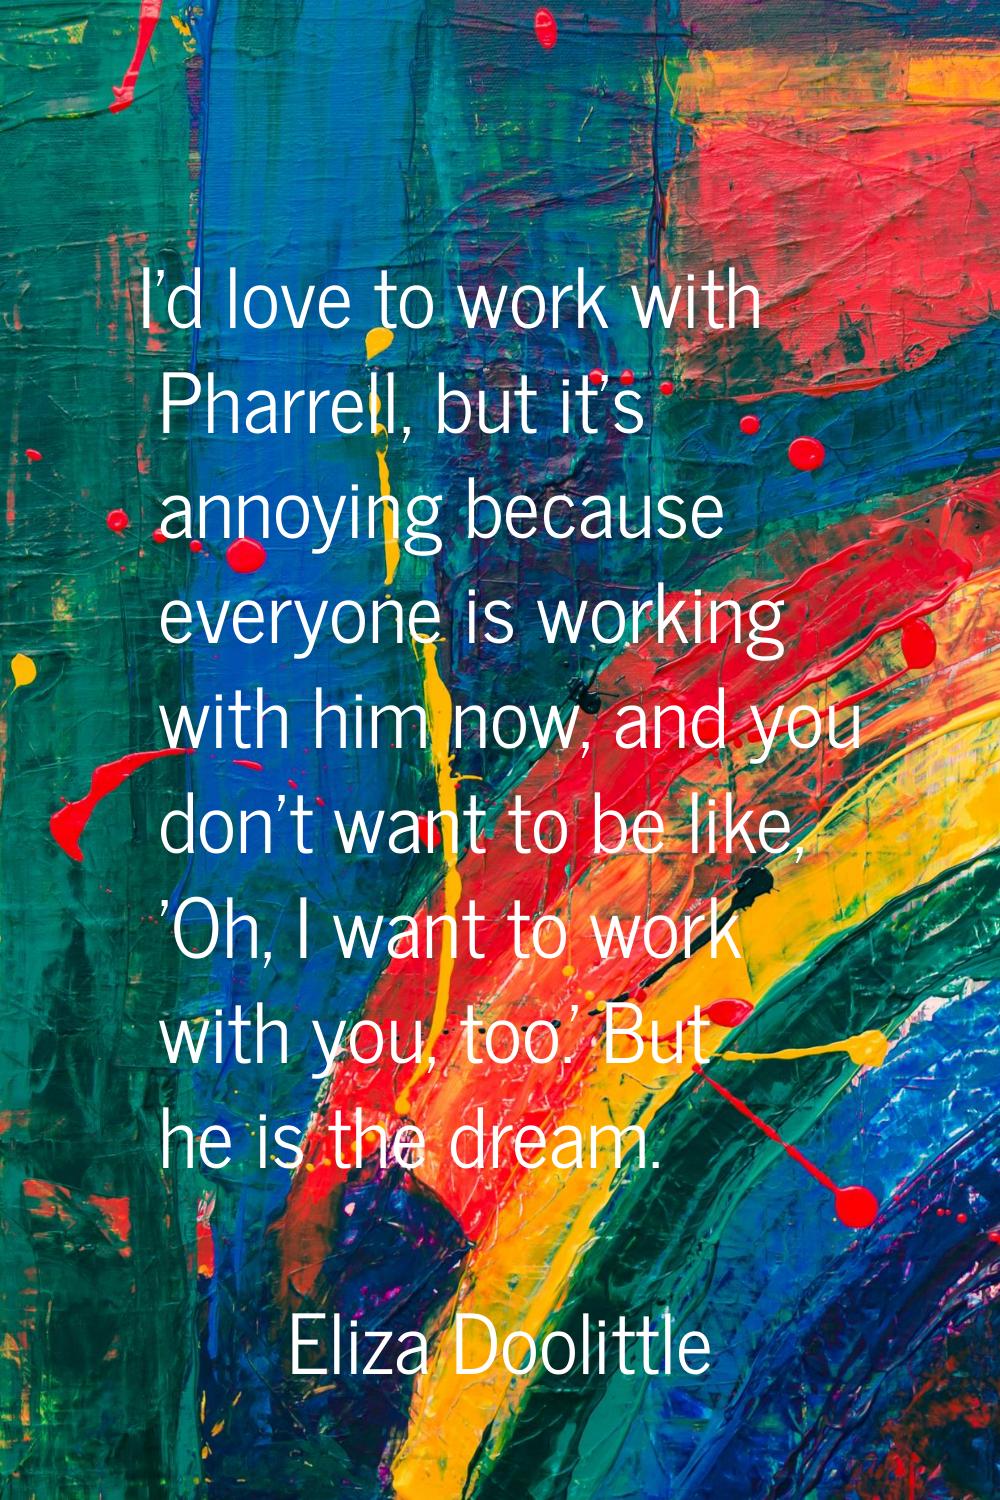 I'd love to work with Pharrell, but it's annoying because everyone is working with him now, and you